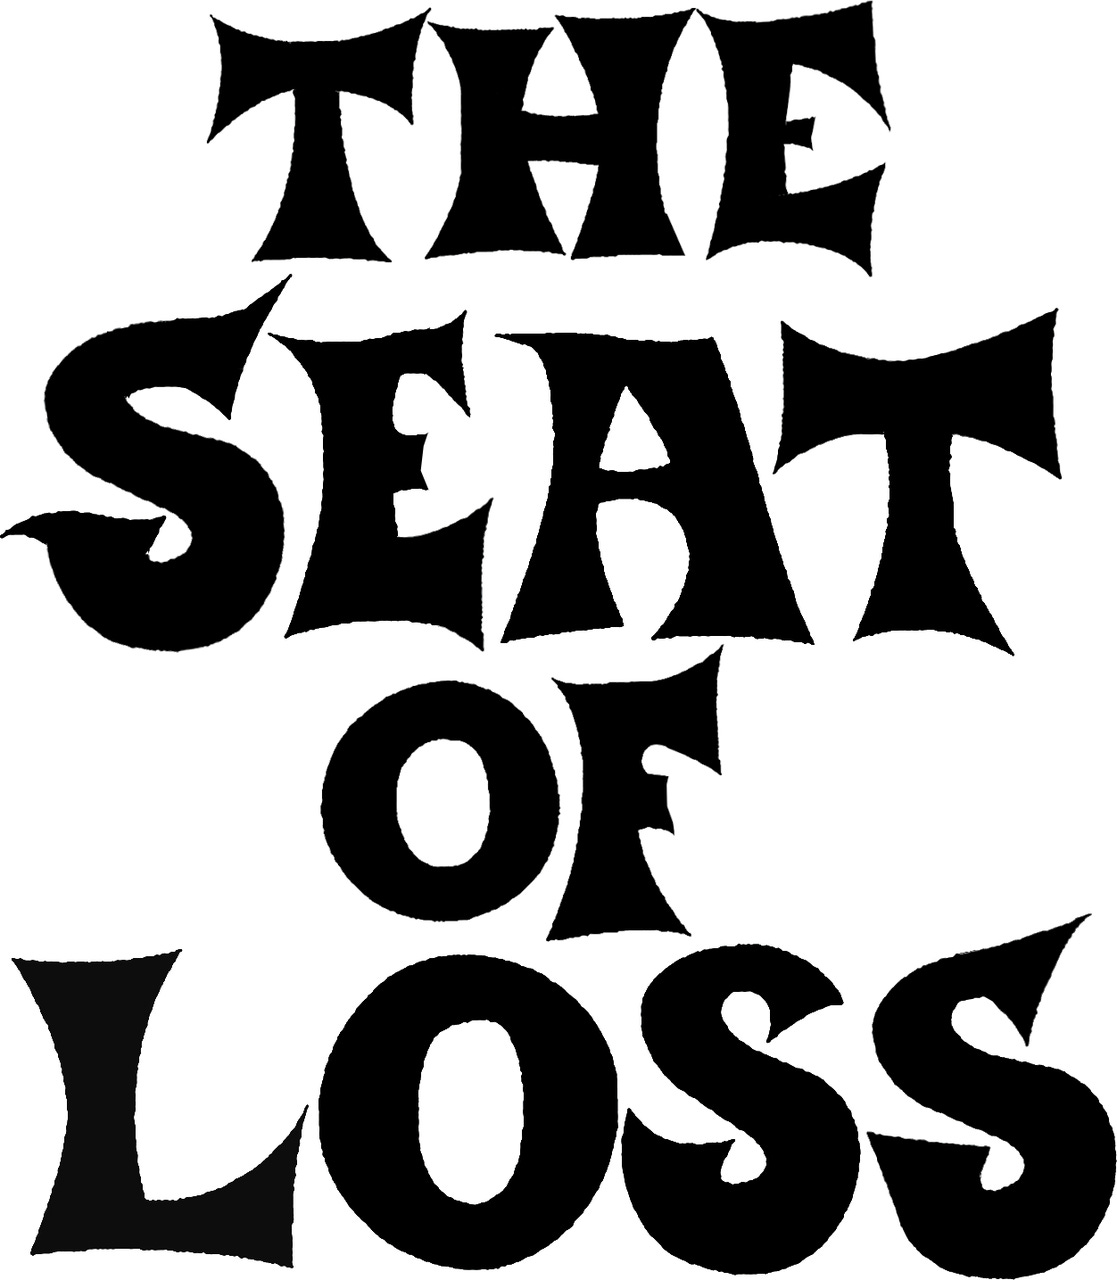 The Seat of Loss